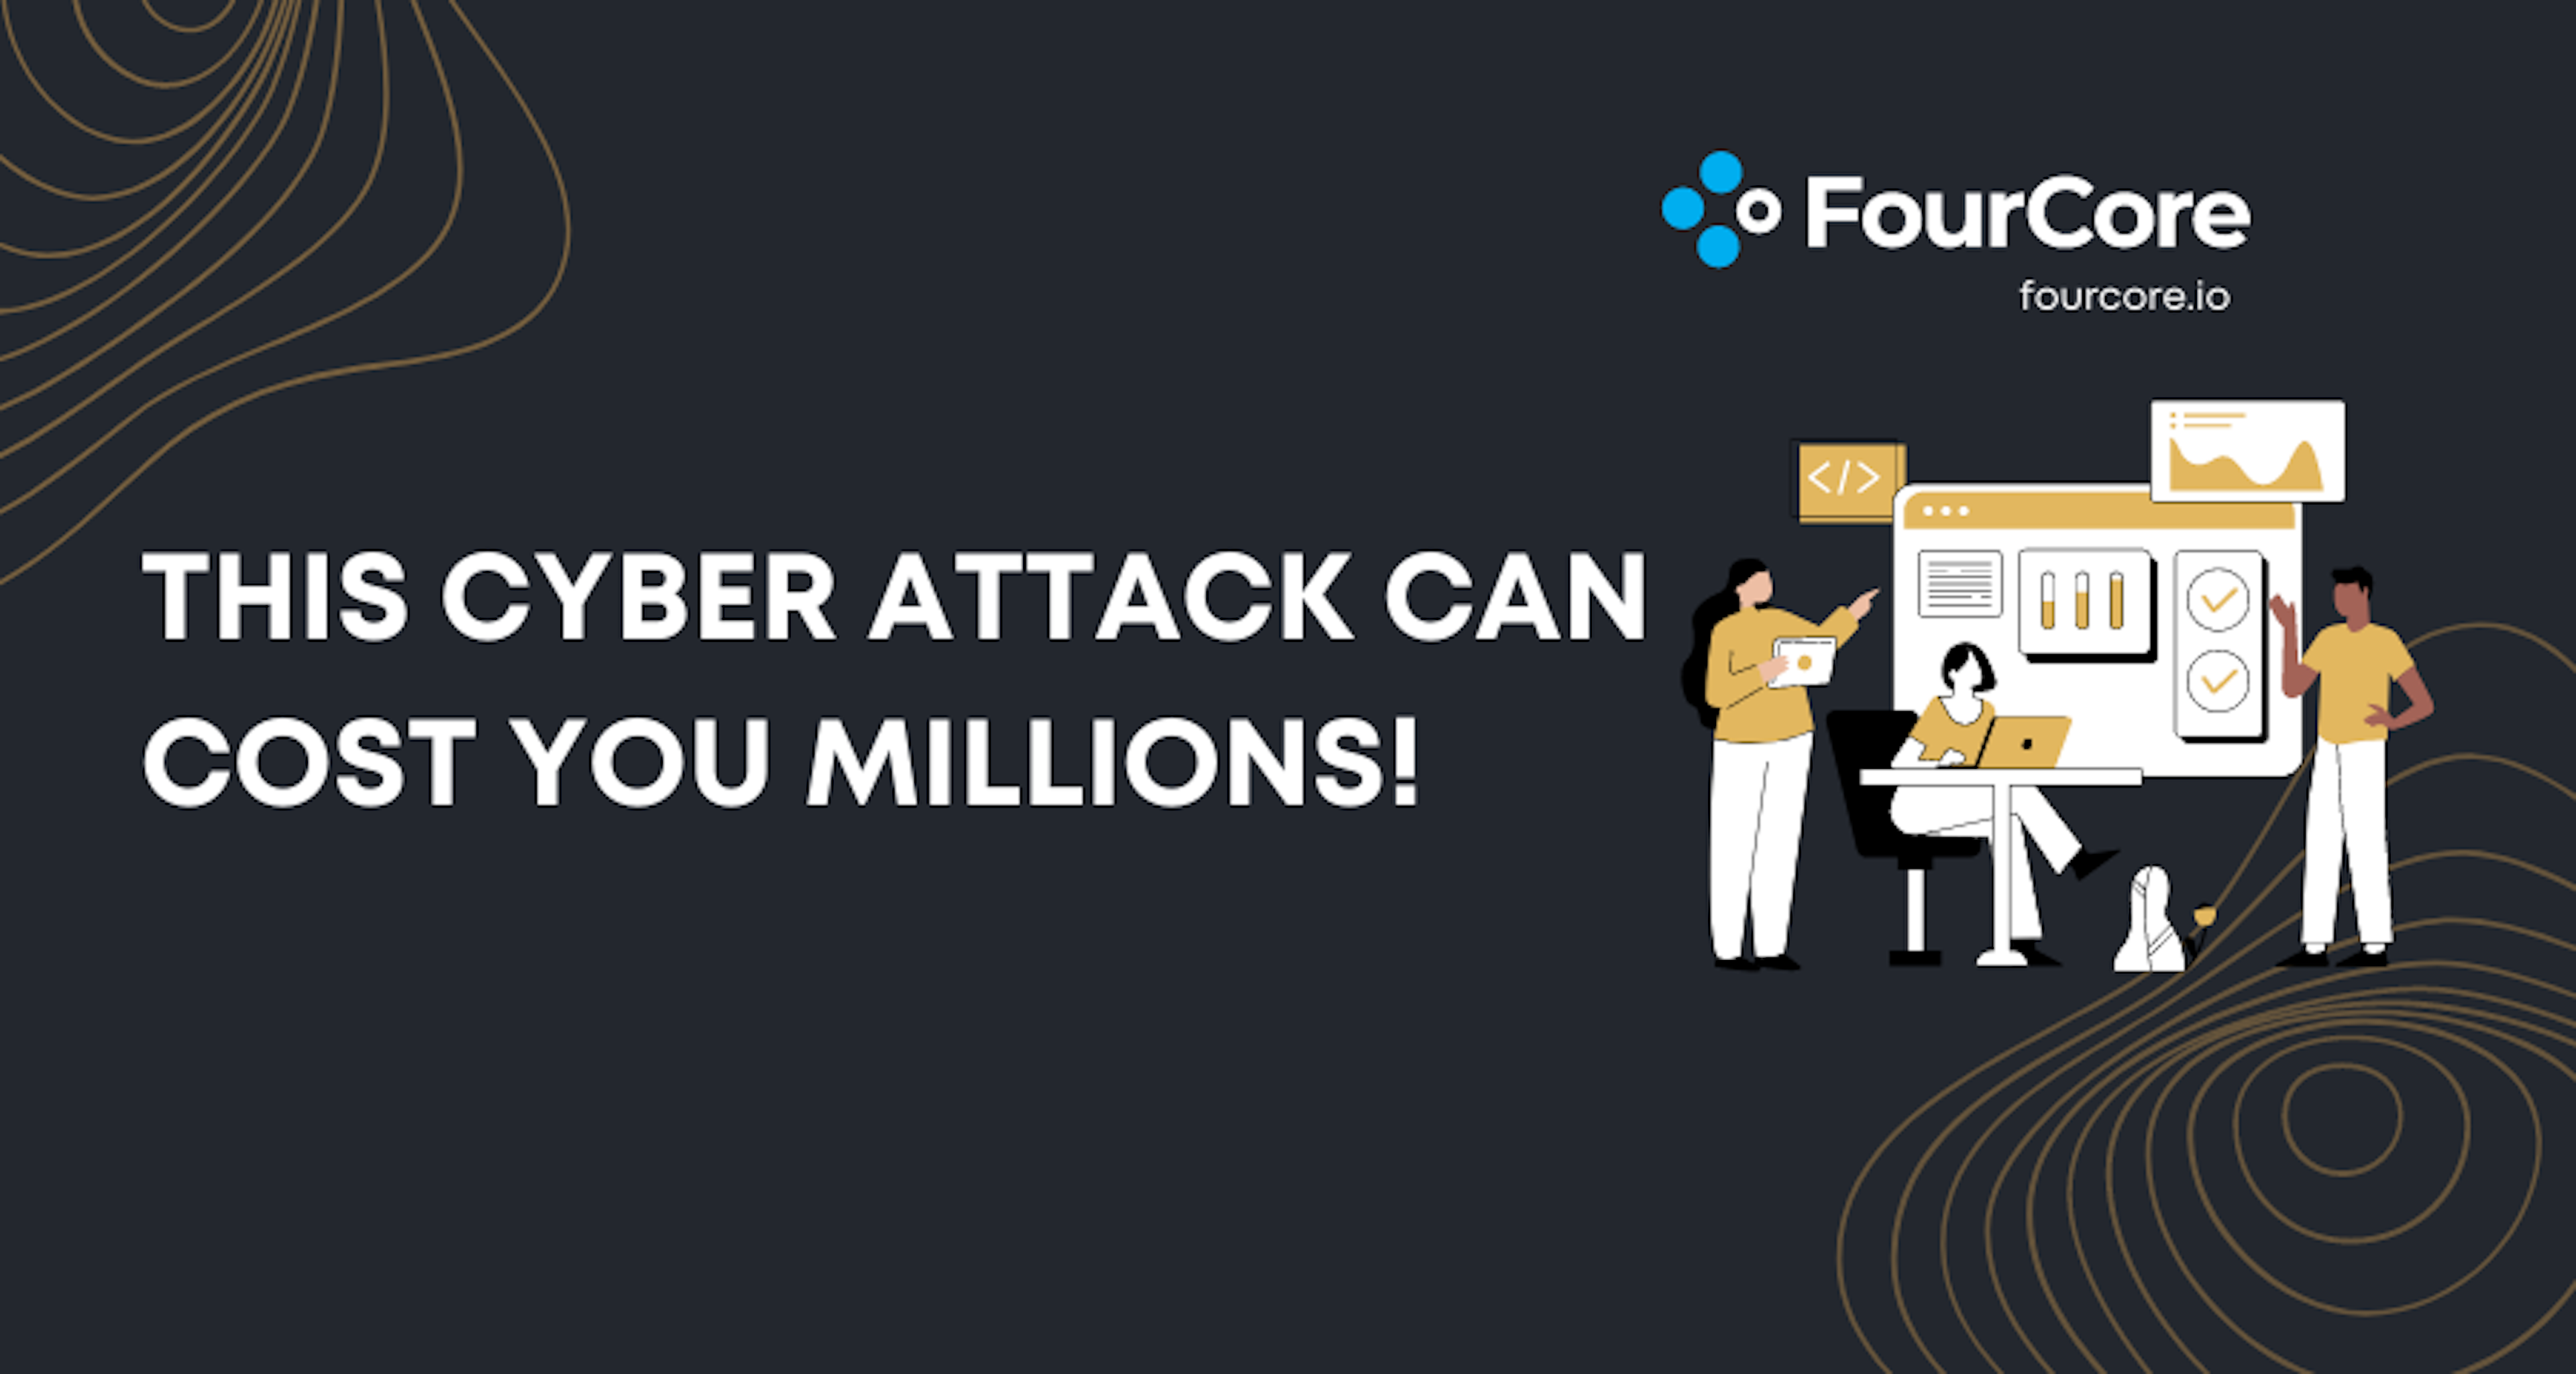 This cyber attack can cost you $4mn. Blog Post Image